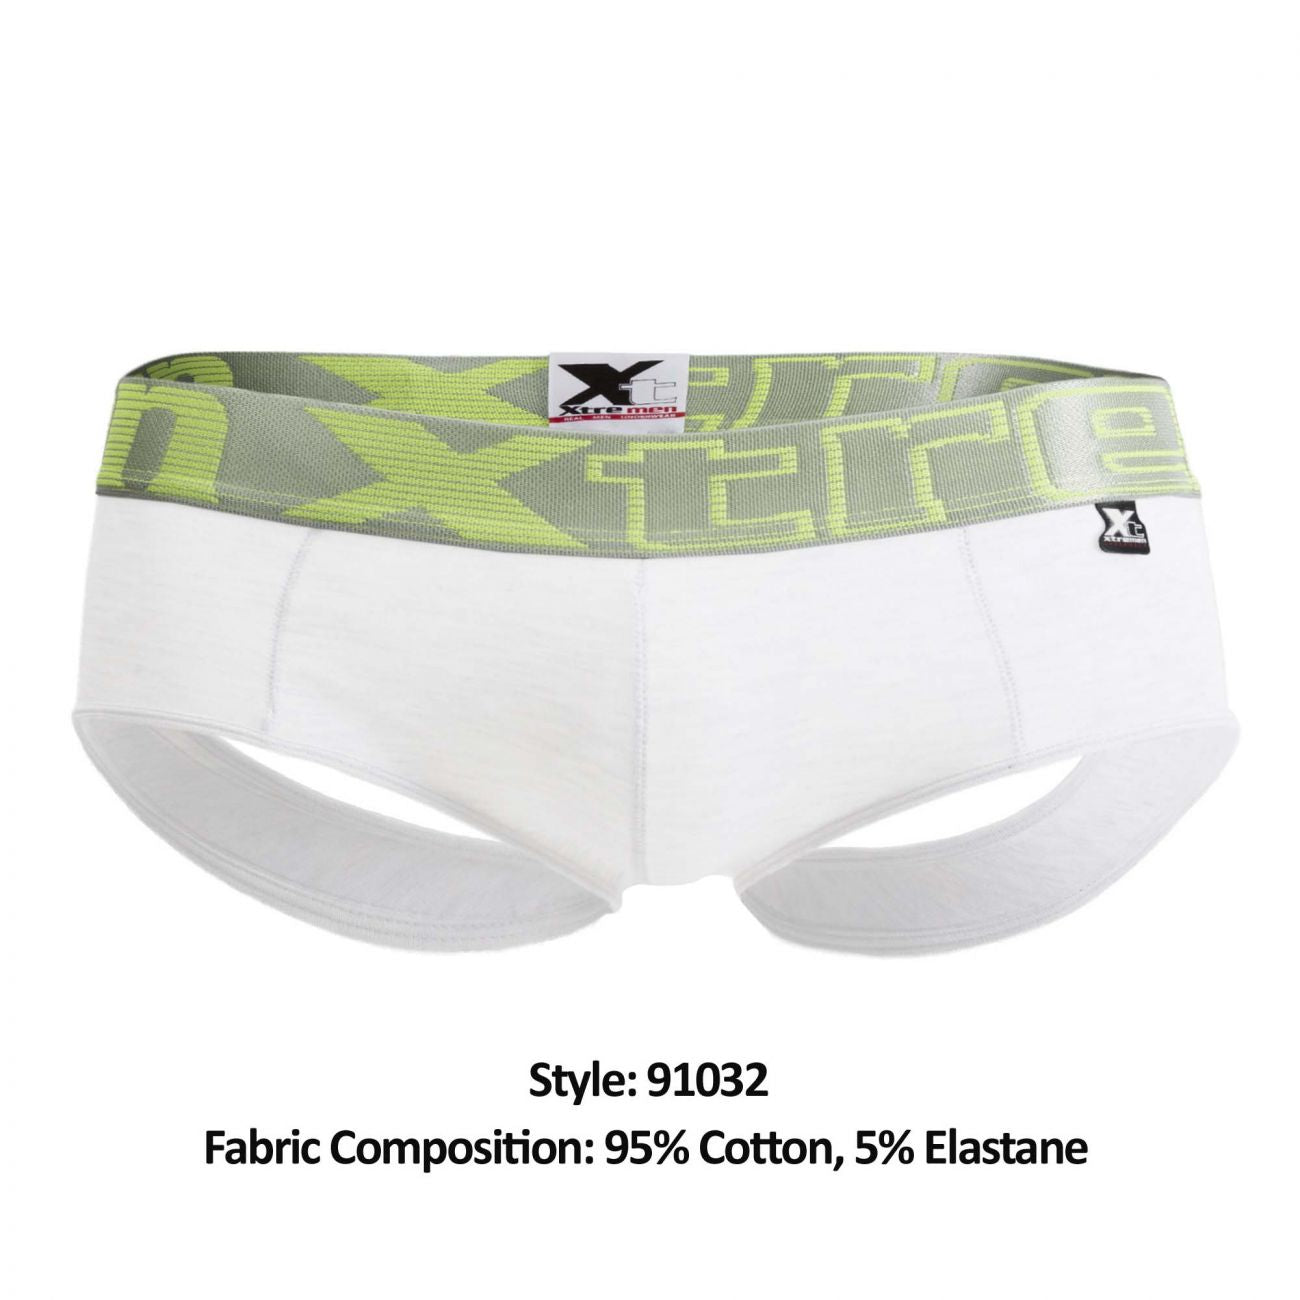 Xtremen 91032 Butt lifter Jockstrap Color White – BlockParty Weho